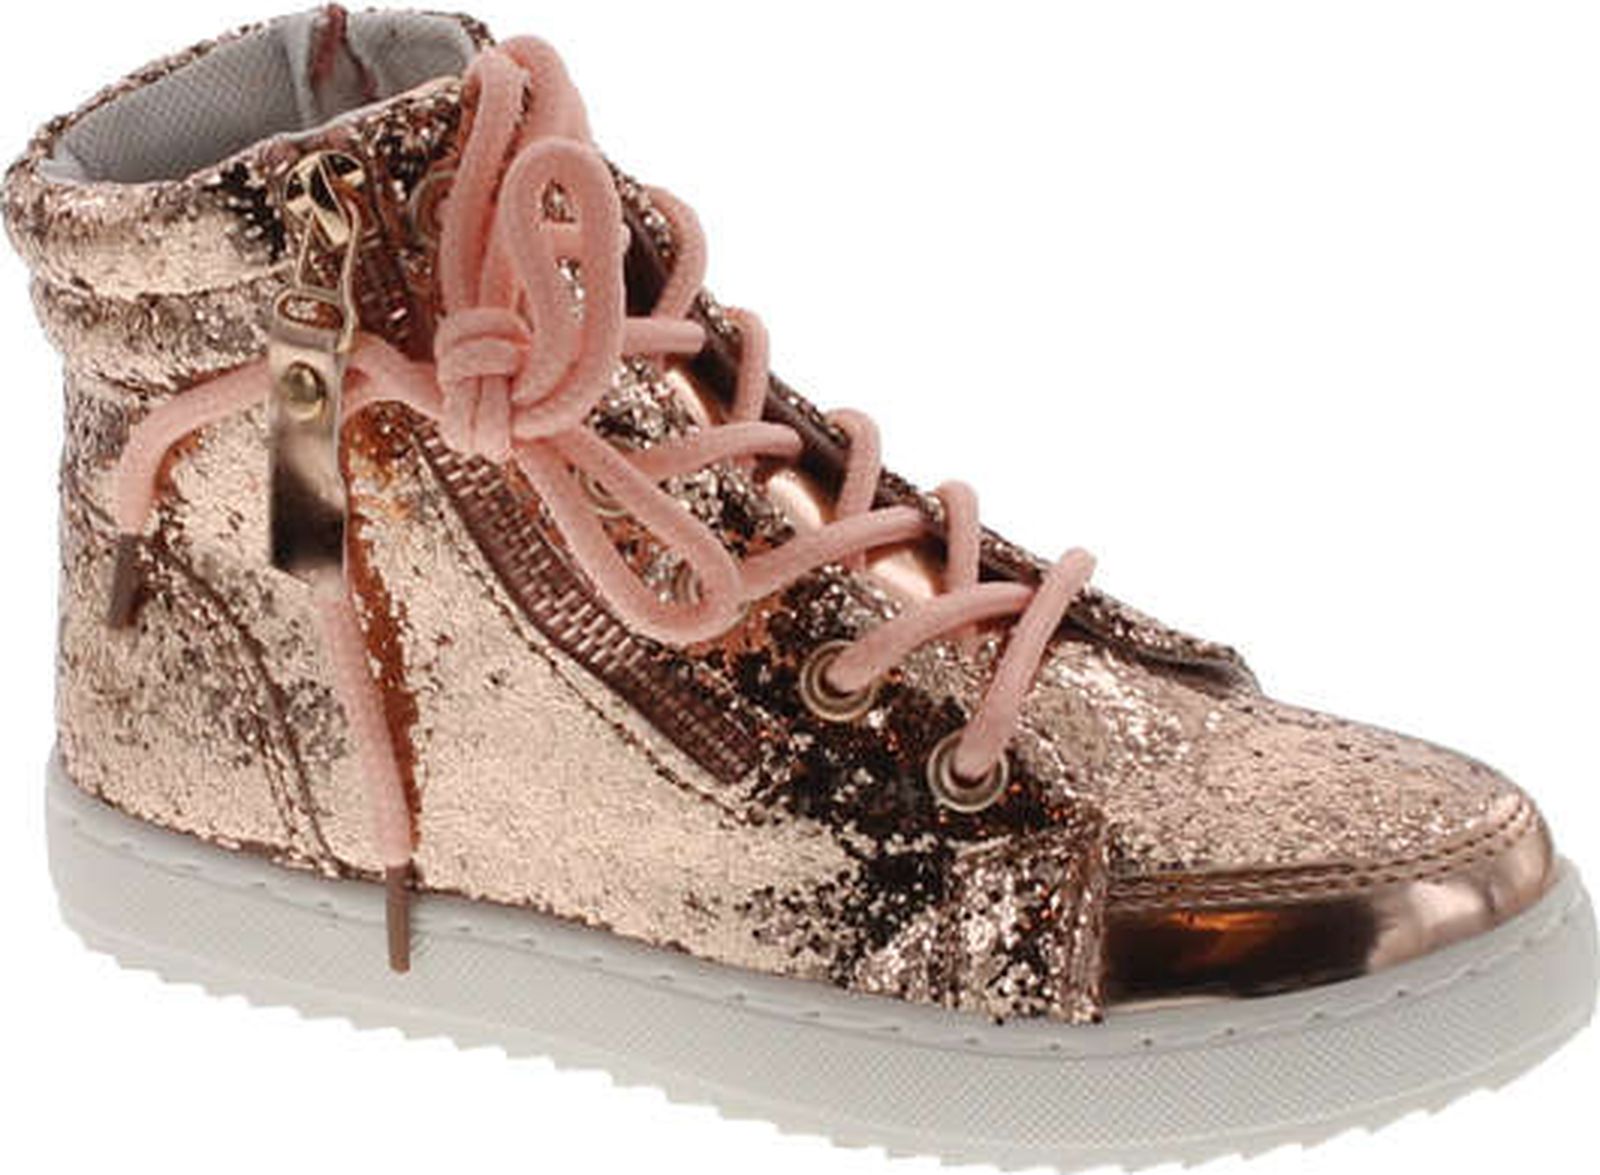 Link Ultra-69K Girl's Glitter Lace Up White Sole Ankle High Top Street Sneakers, Rose Gold, 10 - image 1 of 4